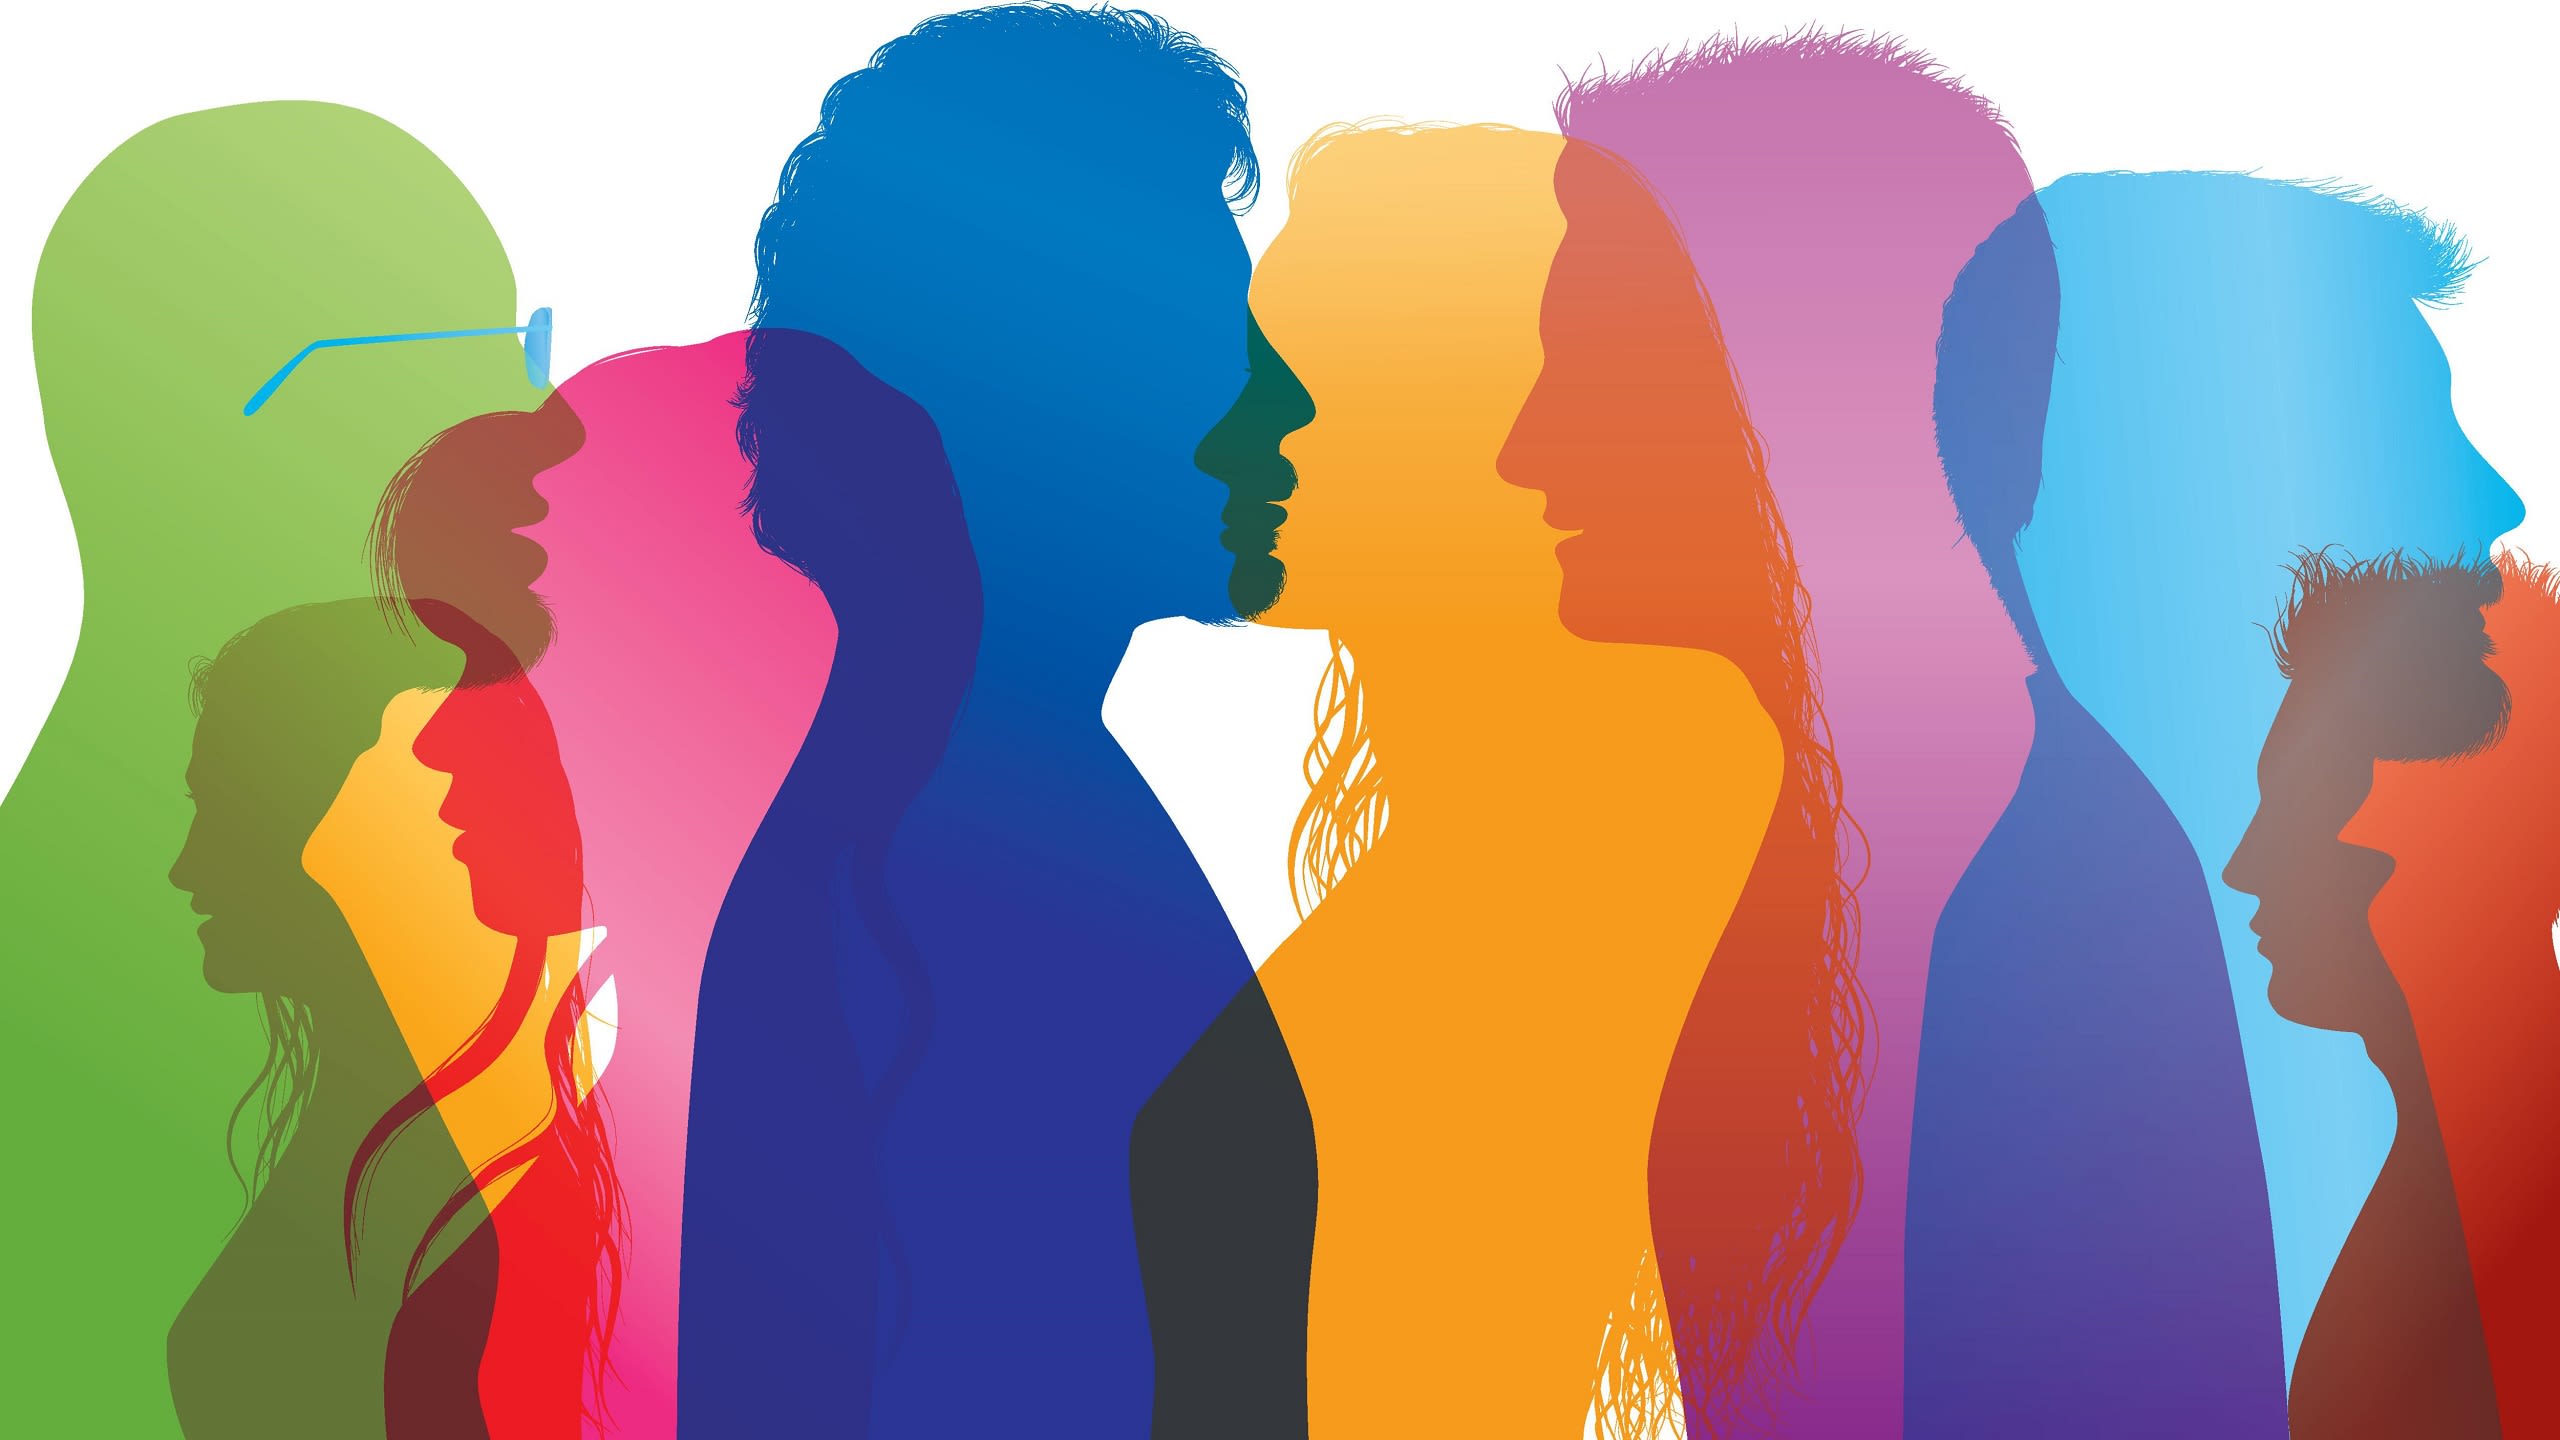 Silhouettes, in rainbow colors, of diverse University students